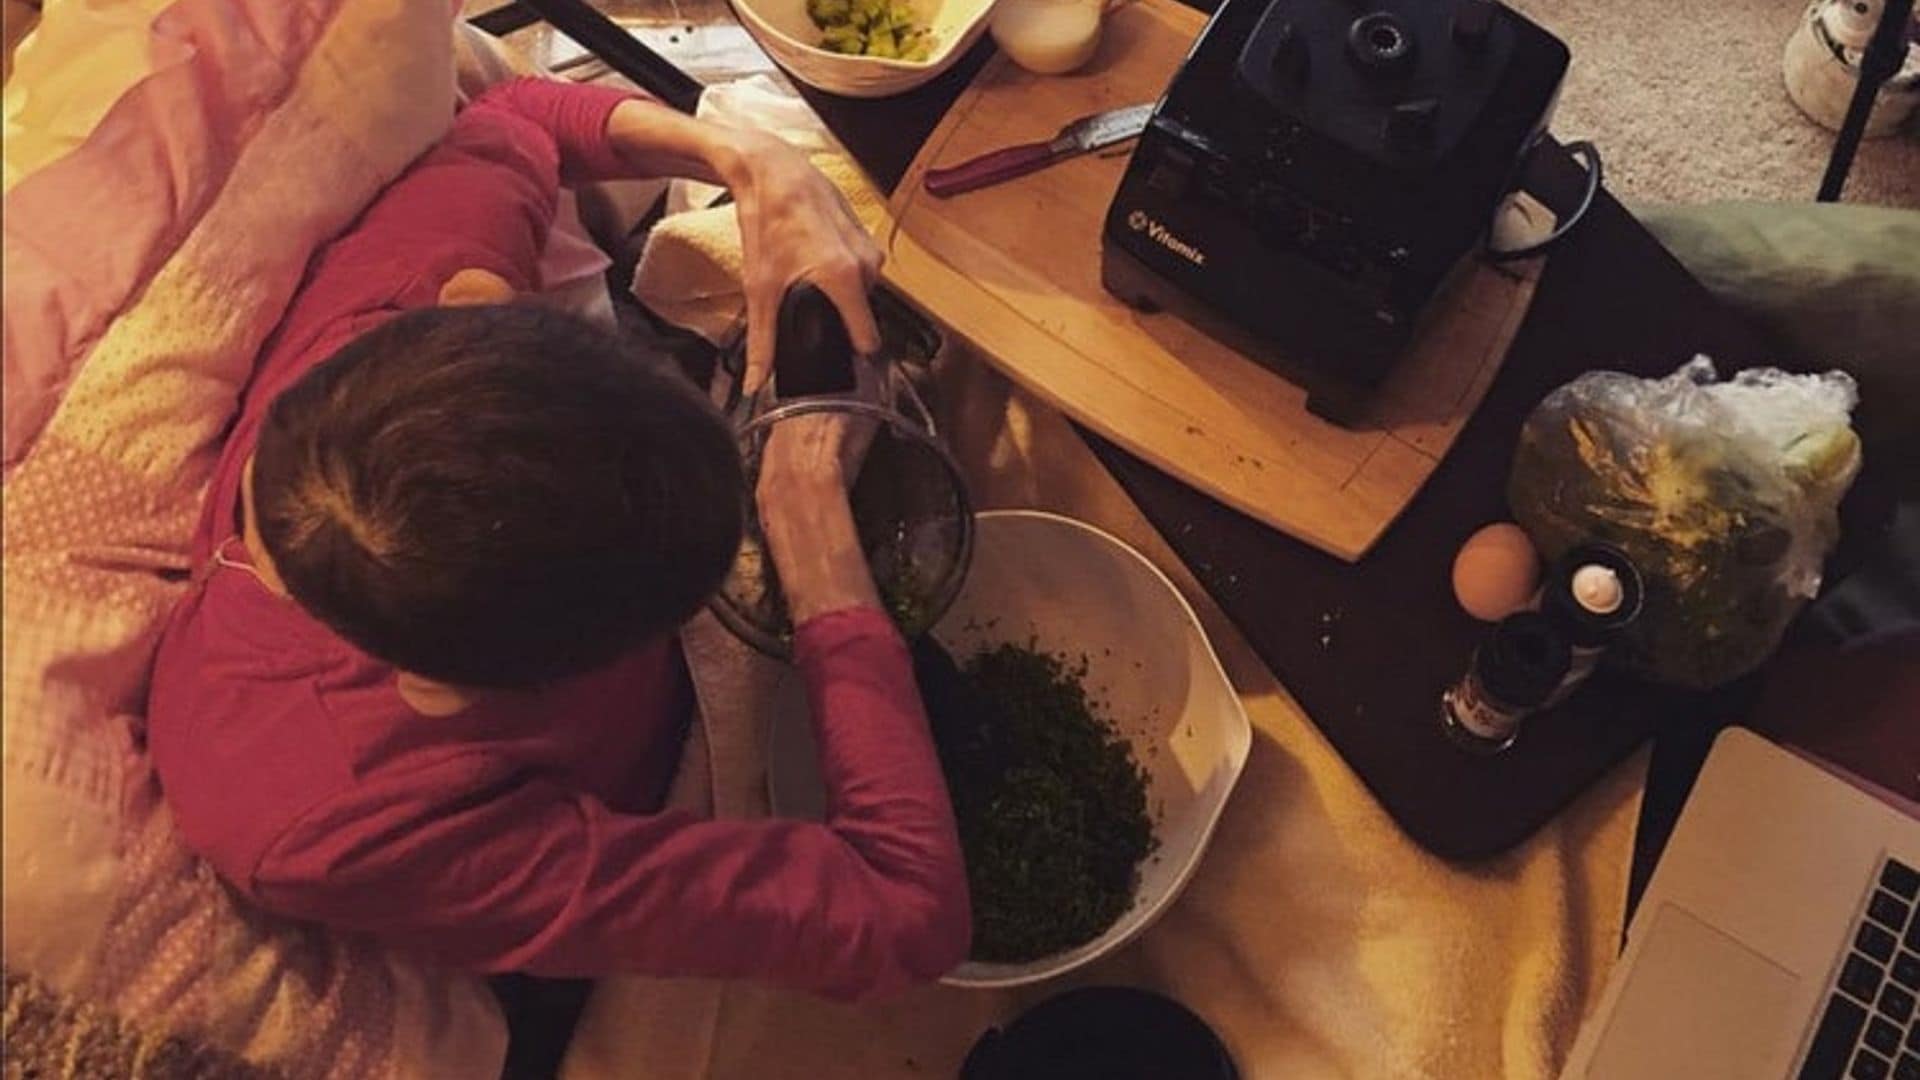 Joey Feek cooks for family from hospice bed after week filled with 'thankfulness'